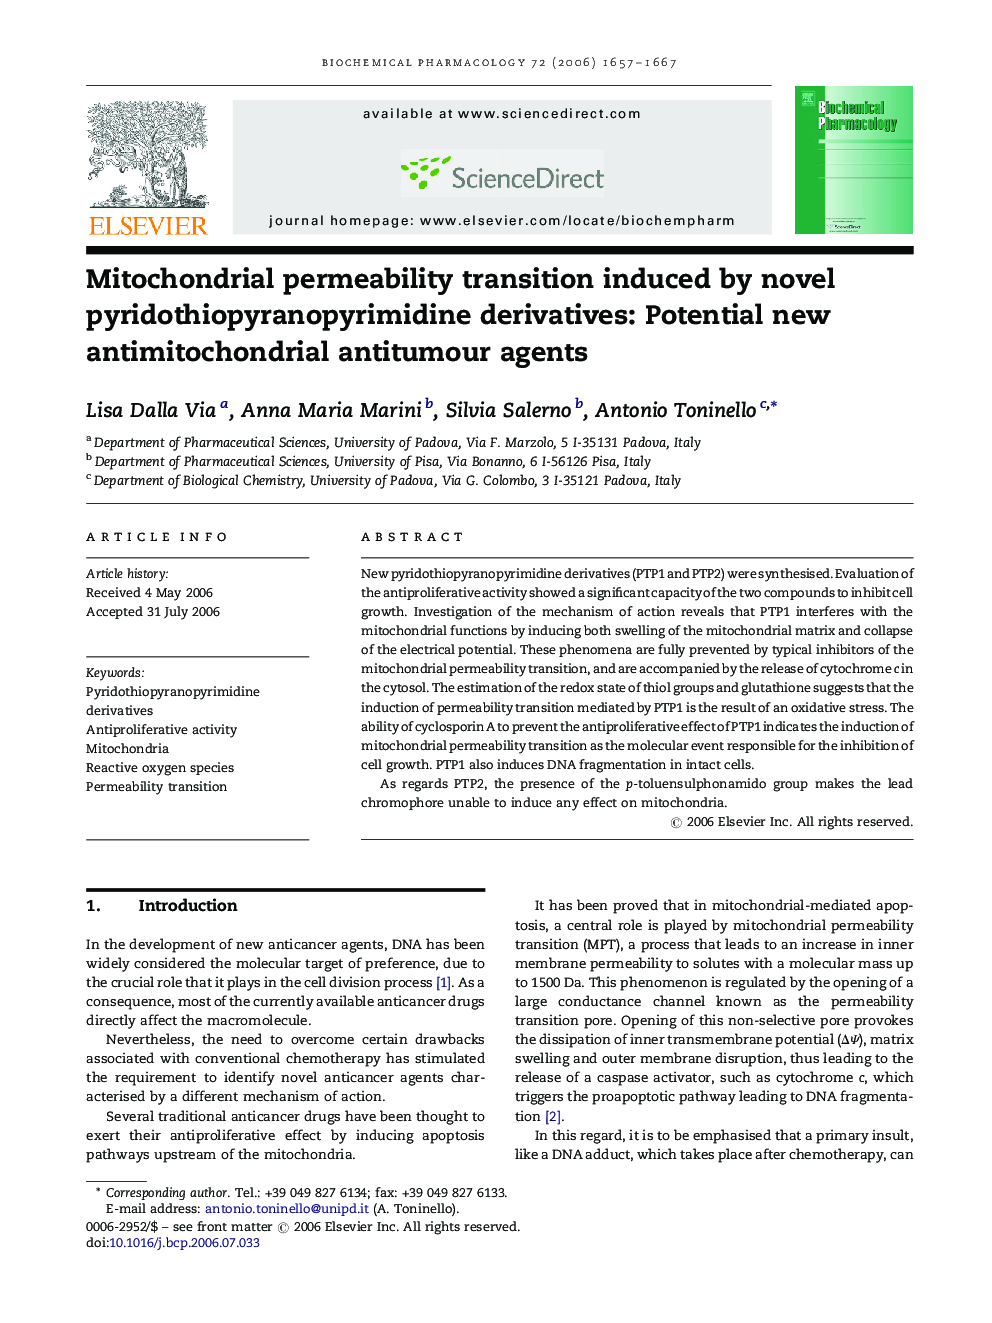 Mitochondrial permeability transition induced by novel pyridothiopyranopyrimidine derivatives: Potential new antimitochondrial antitumour agents